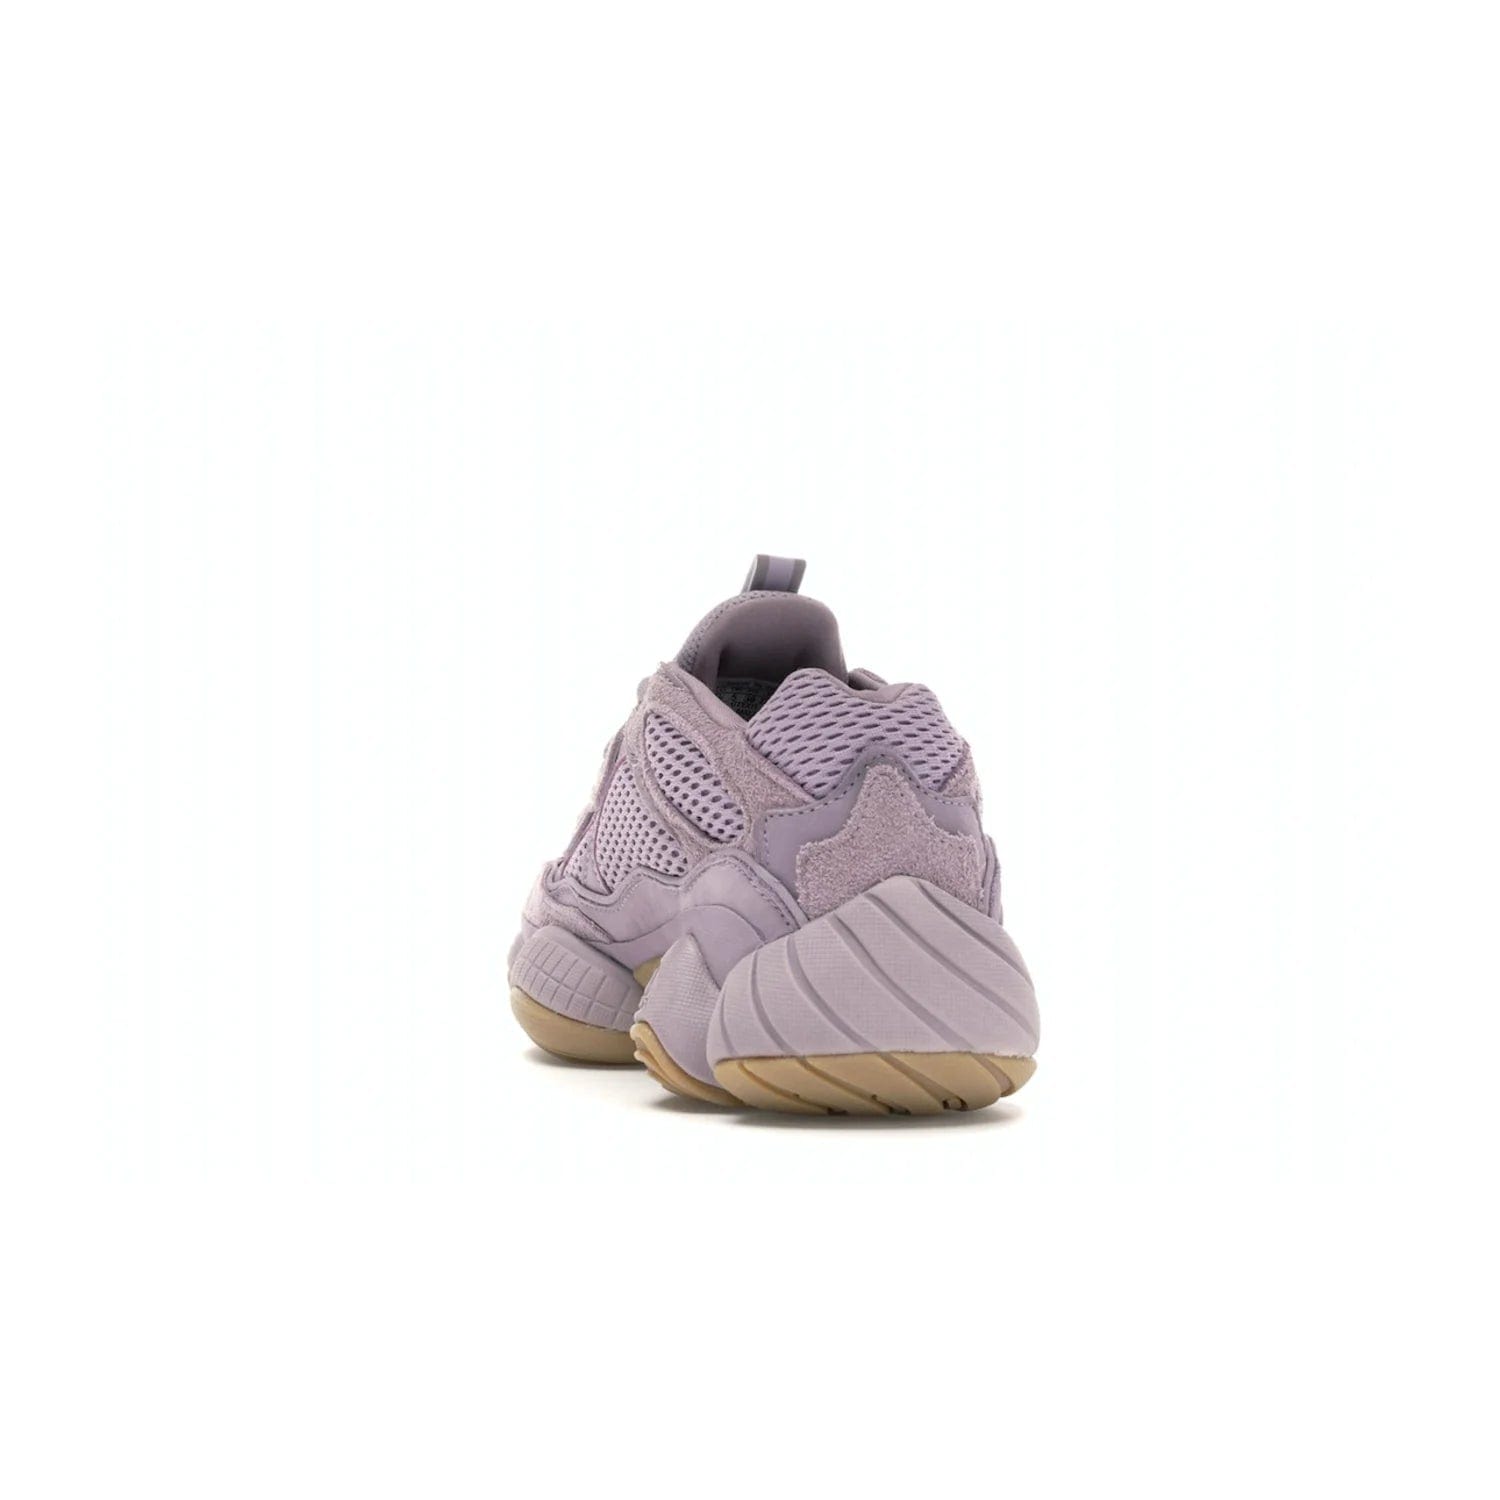 adidas Yeezy 500 Soft Vision - Image 26 - Only at www.BallersClubKickz.com - New adidas Yeezy 500 Soft Vision sneaker featuring a combination of mesh, leather, and suede in a classic Soft Vision colorway. Gum rubber outsole ensures durability and traction. An everyday sneaker that stands out from the crowd.